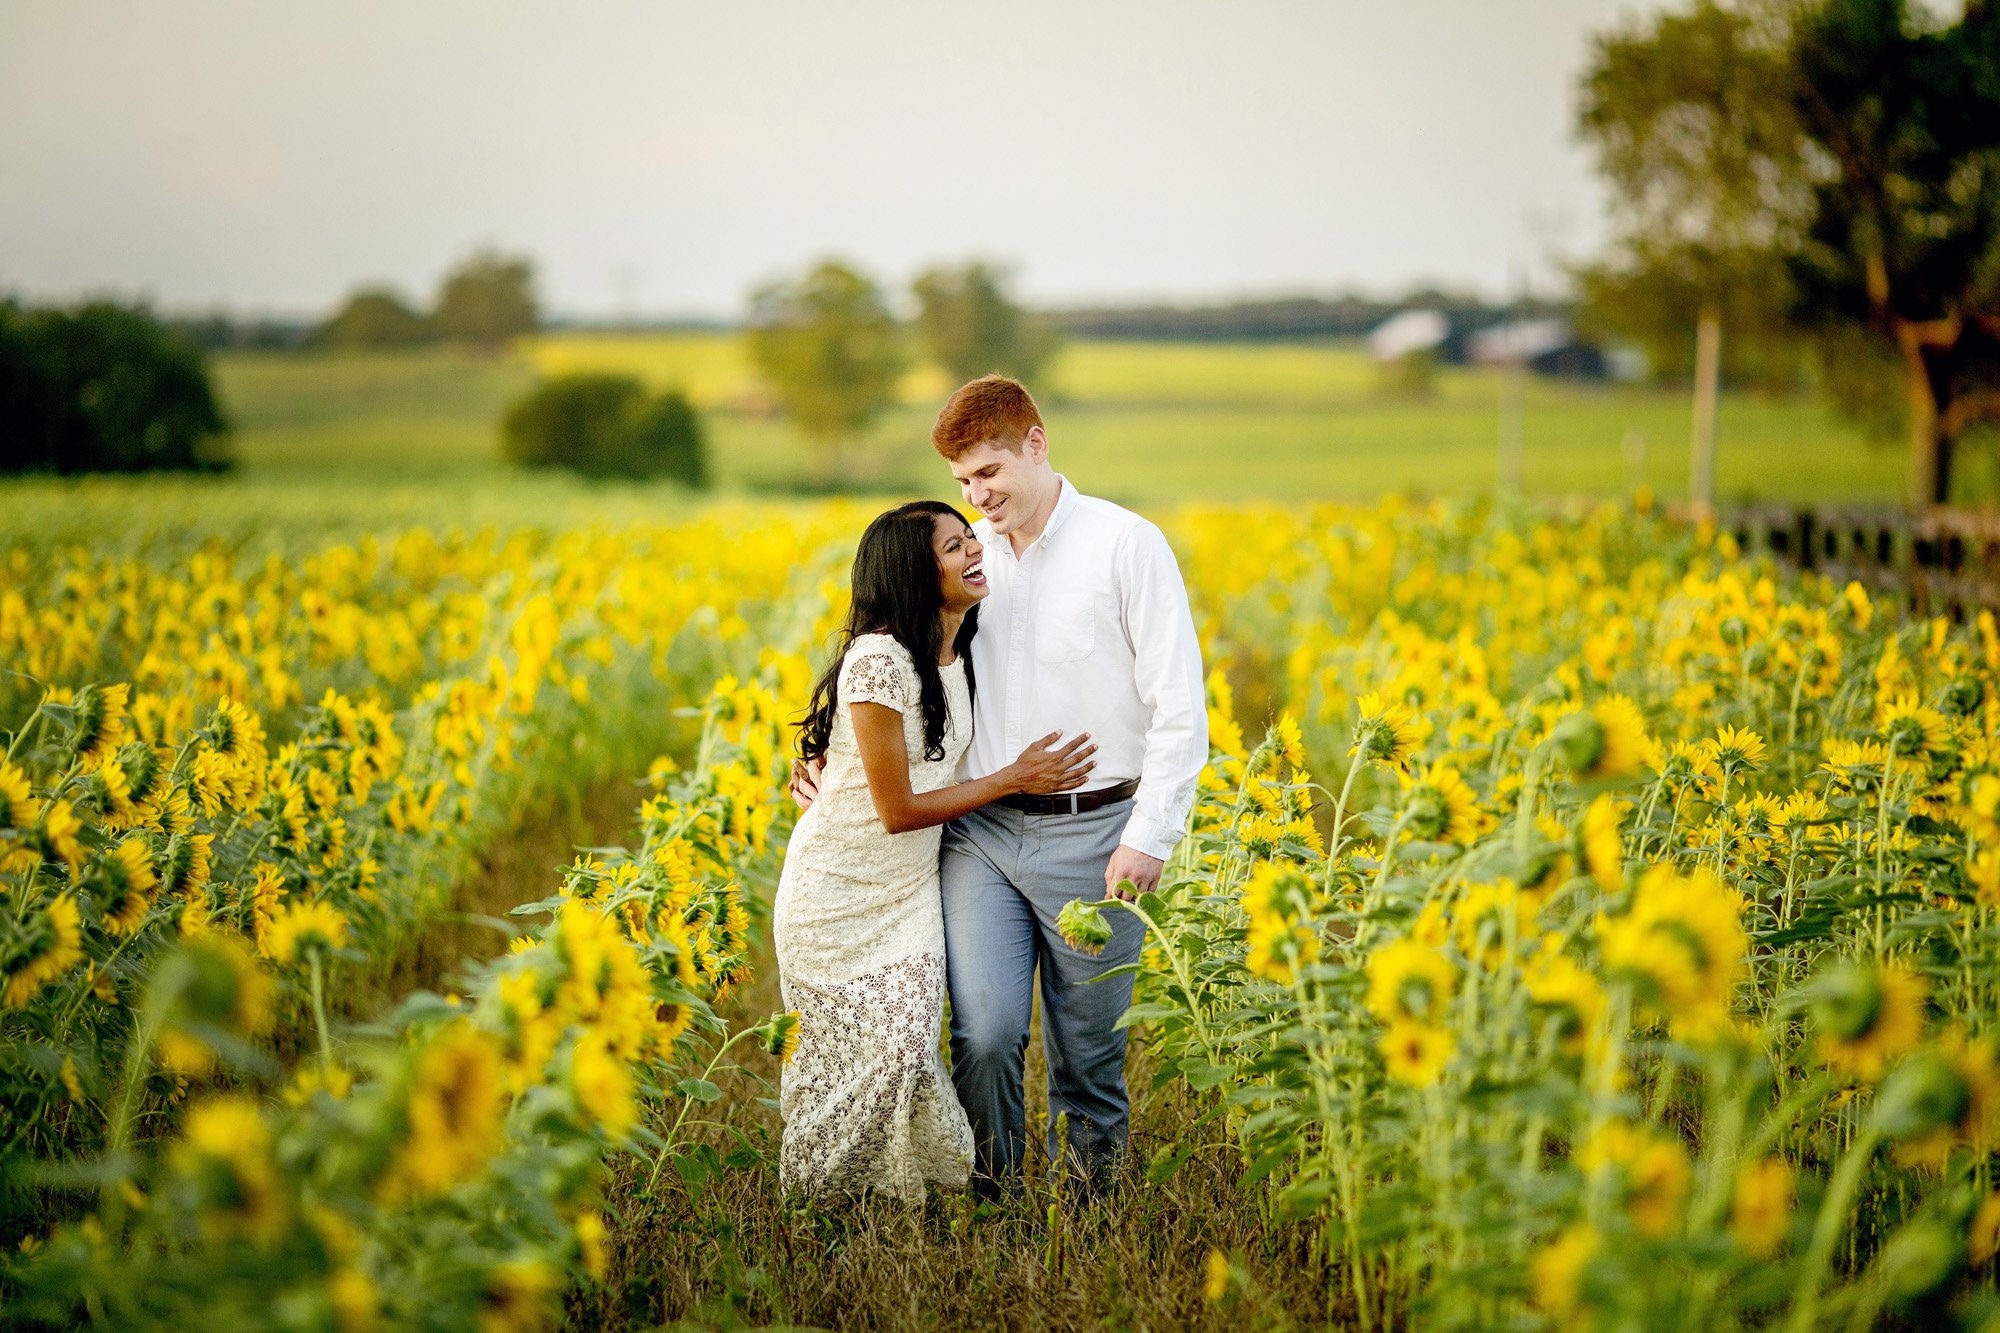 Seriously_Sabrina_Photography_Lexington_Midway_Kentucky_Engagement_Merefield_Sunflowers_Naz_and_Drew15.jpg